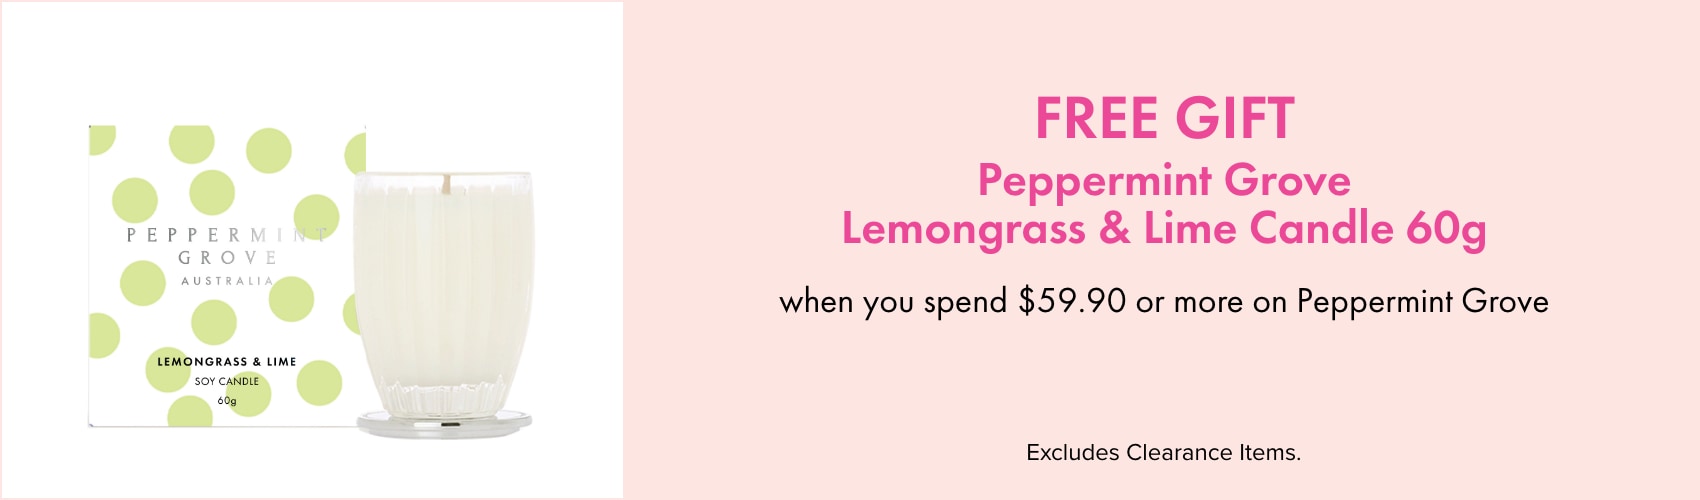 Free gift Peppermint Grove lemongrass & Lime candle 60G